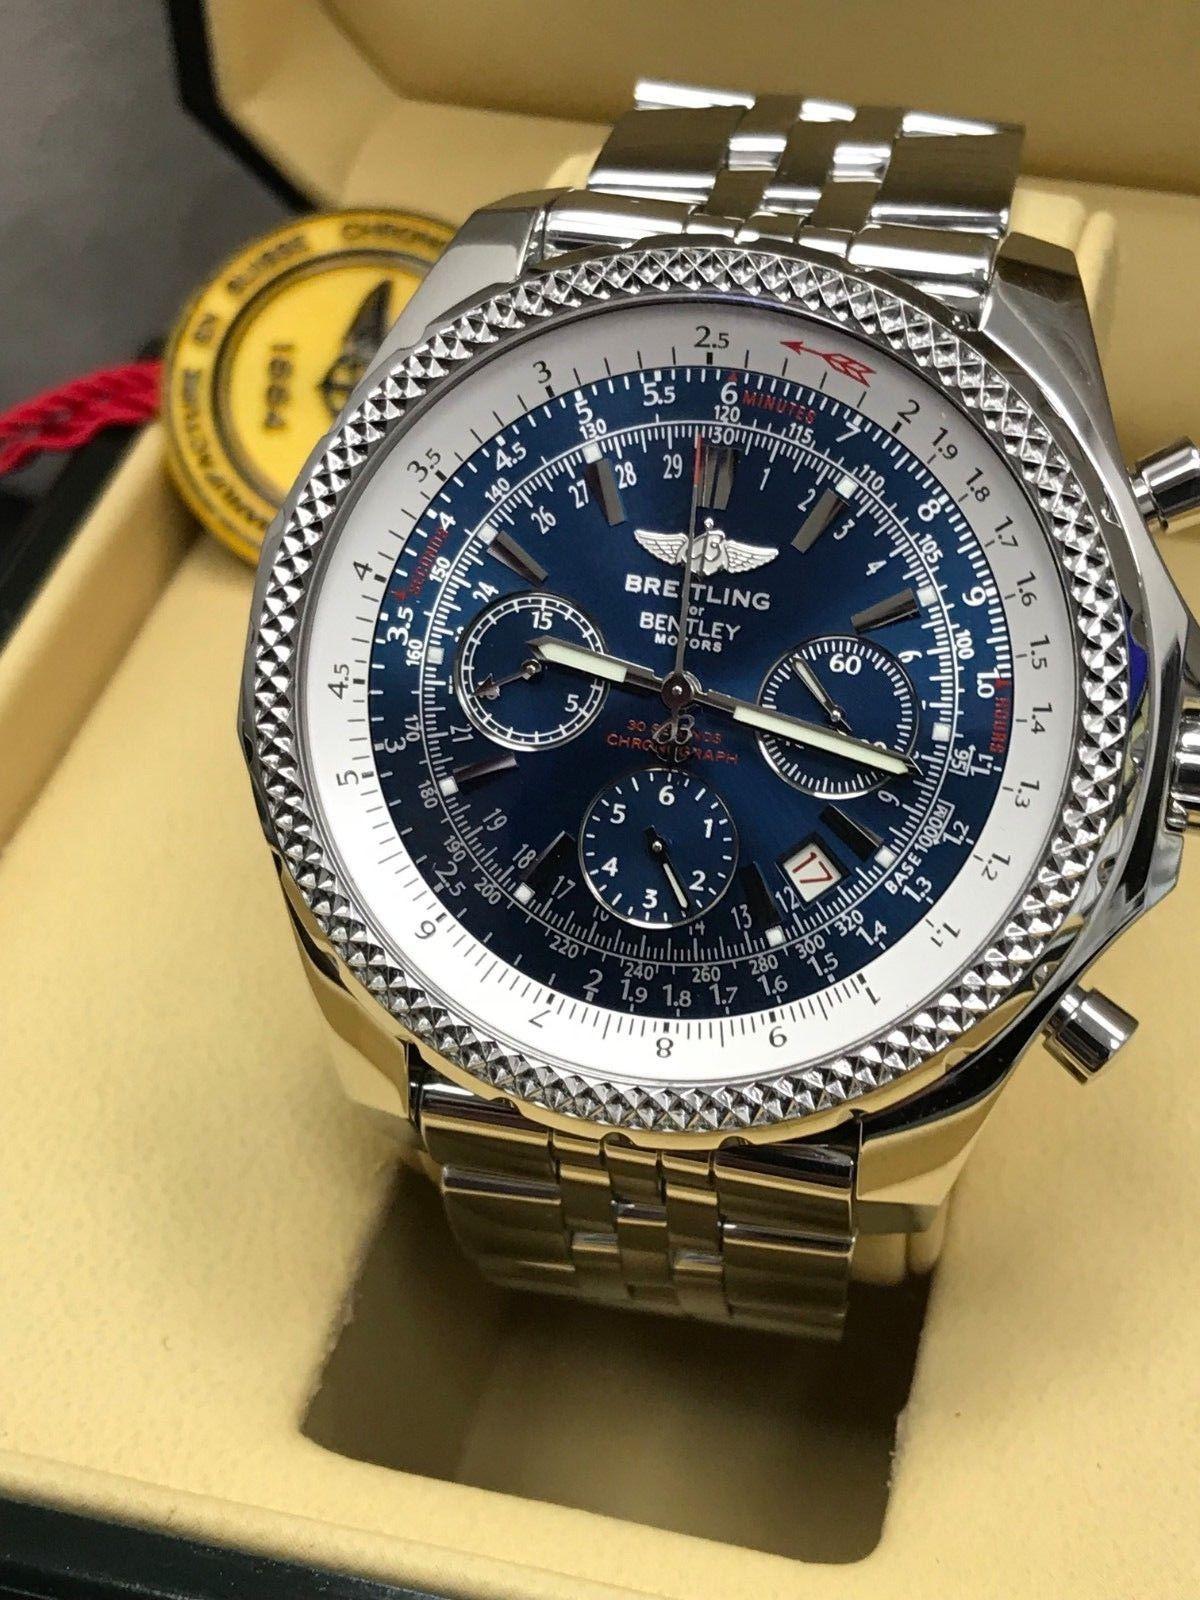 breitling a25362 special edition certified chronometer 100m/330ft price